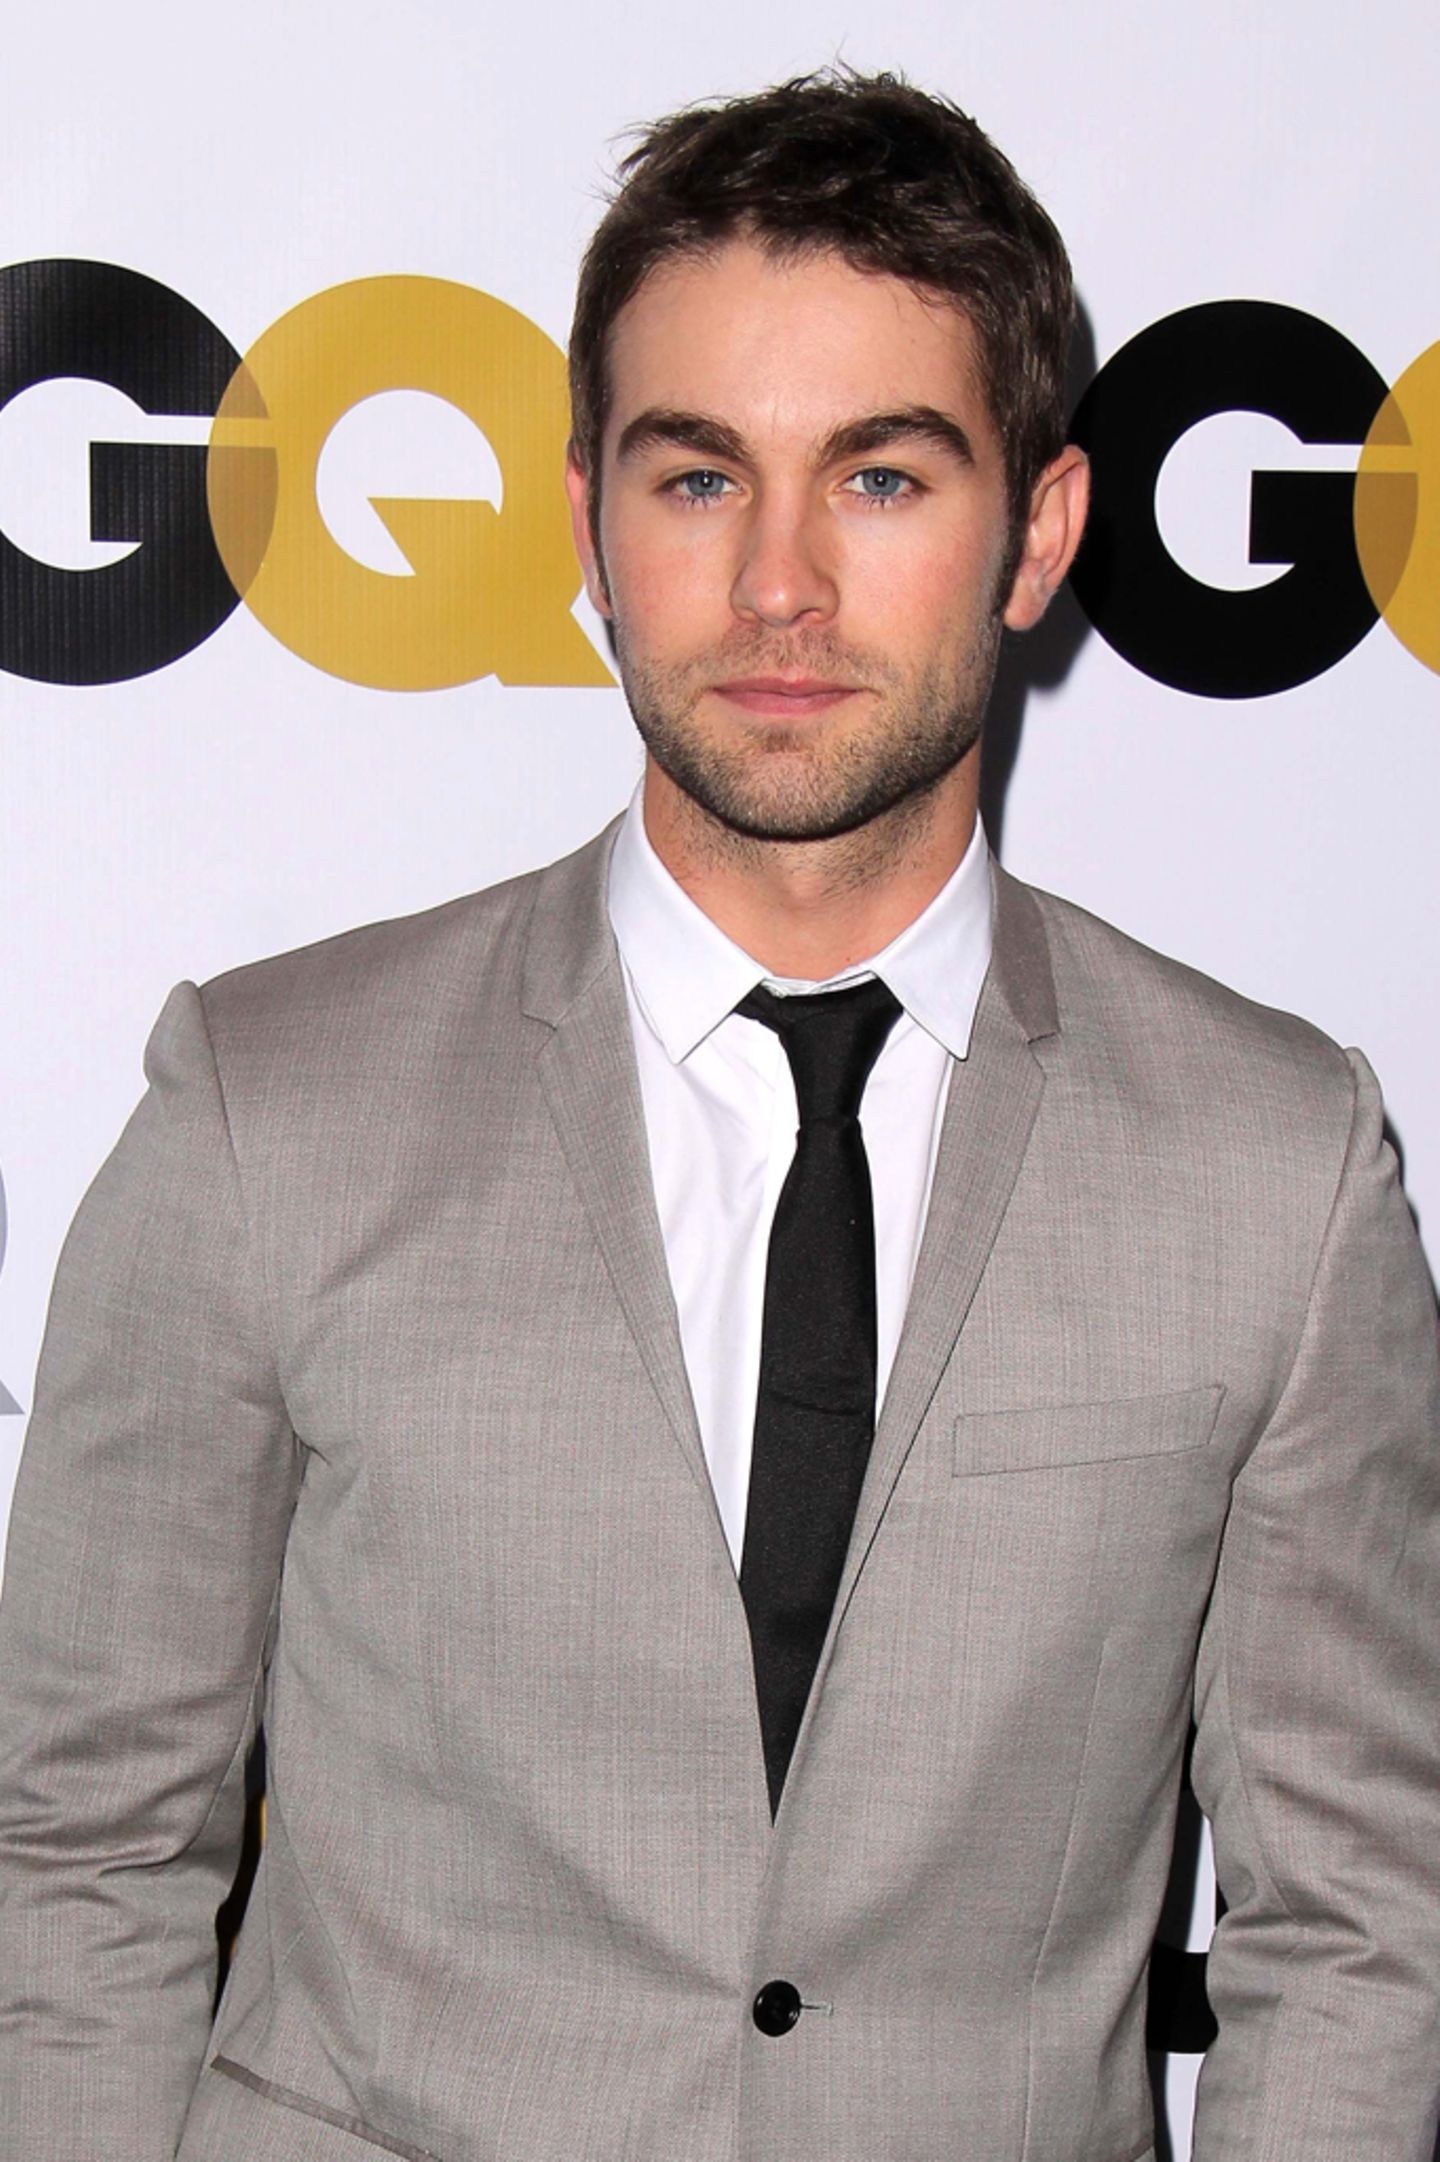 Chace Crawford: Biff McIntosh, Glee, An American musical comedy-drama television series. 1440x2170 HD Background.